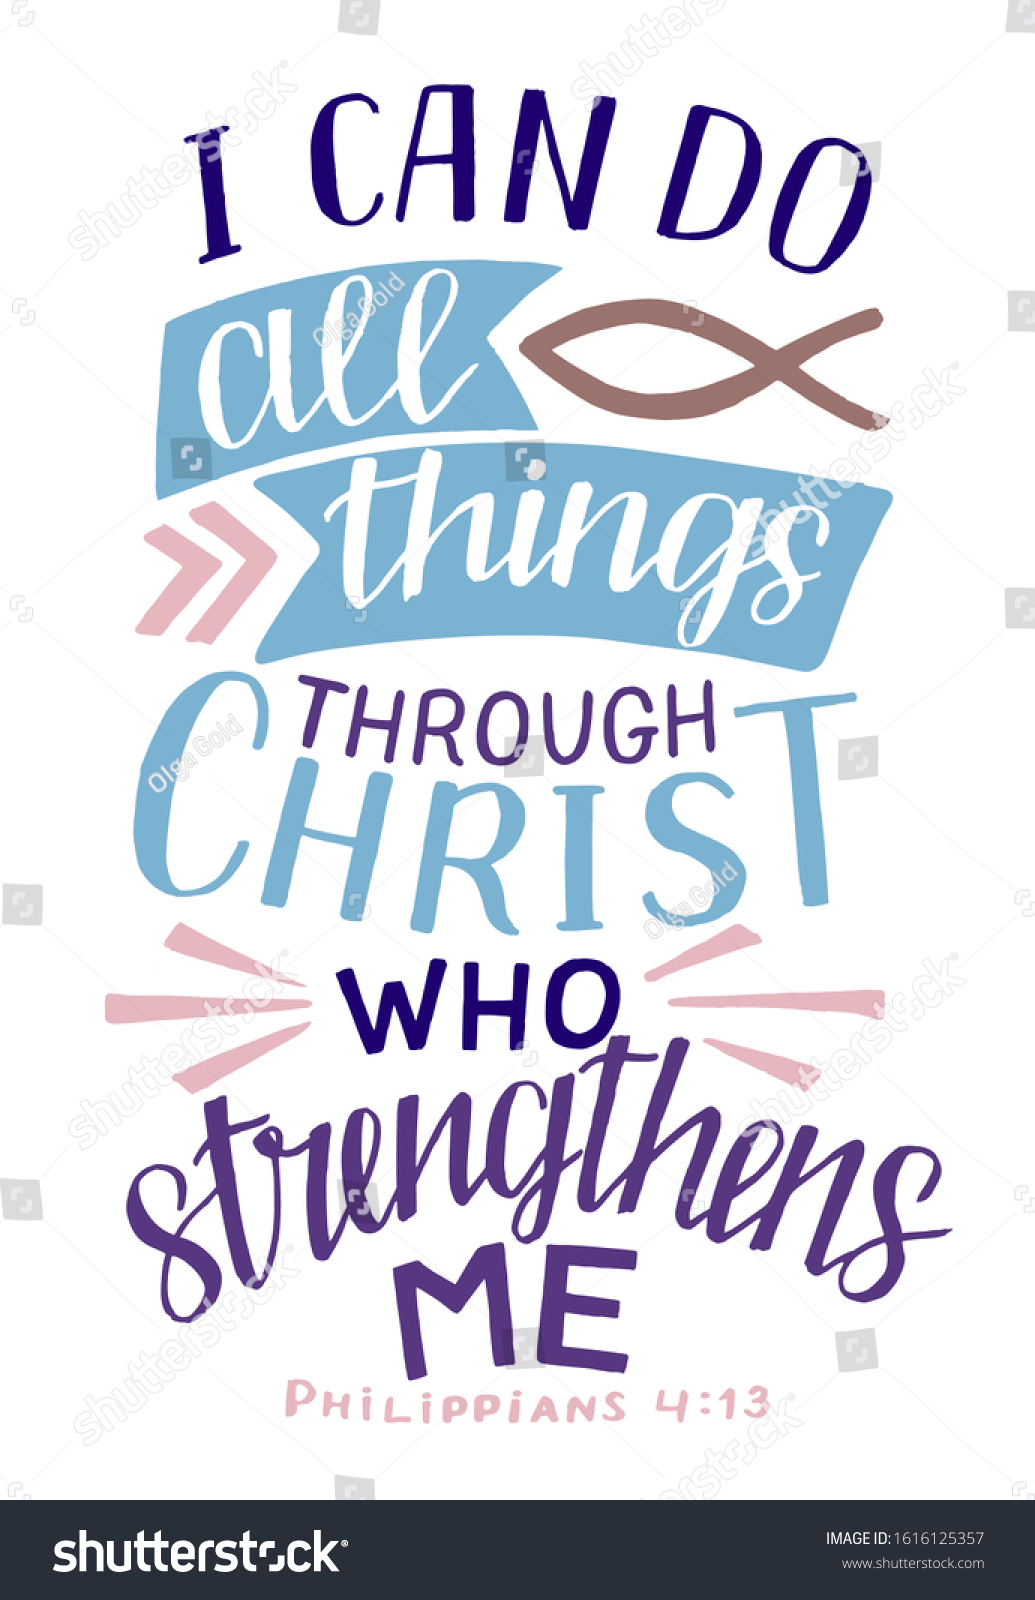 SVG of Hand lettering with Bible verse I can do all things through Christ, who strengthens me . Biblical background. Modern calligraphy Scripture print. Christian poster. Motivational quote svg